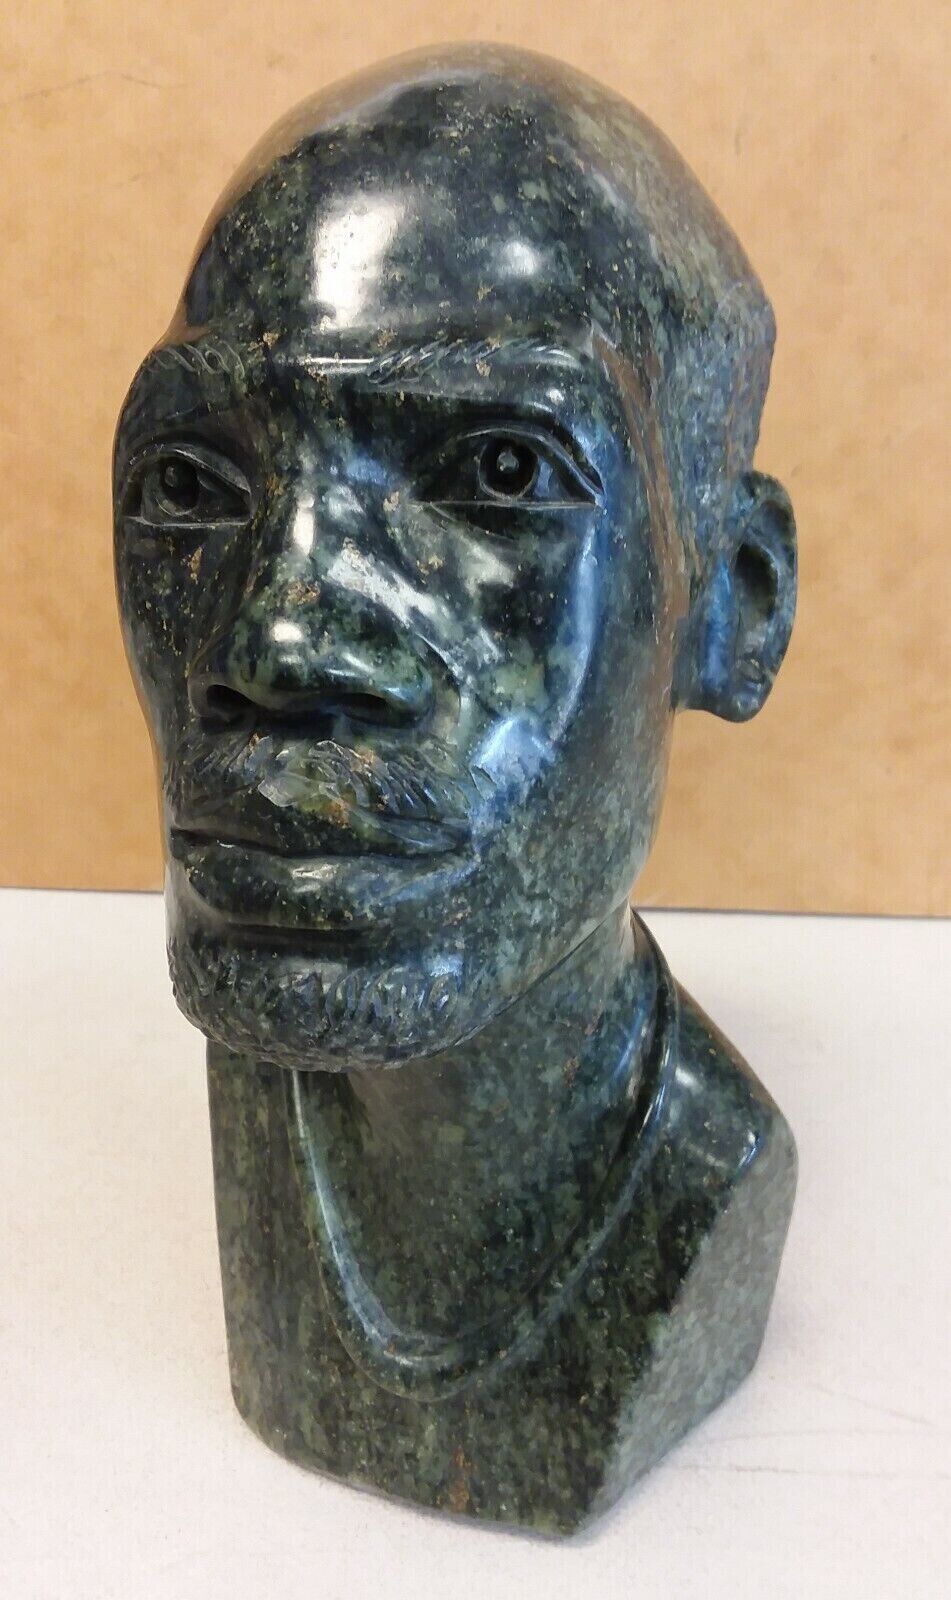 African Serpentine MAN BUST Shona Stone Carved Signed Sculpture ZIMBABWE